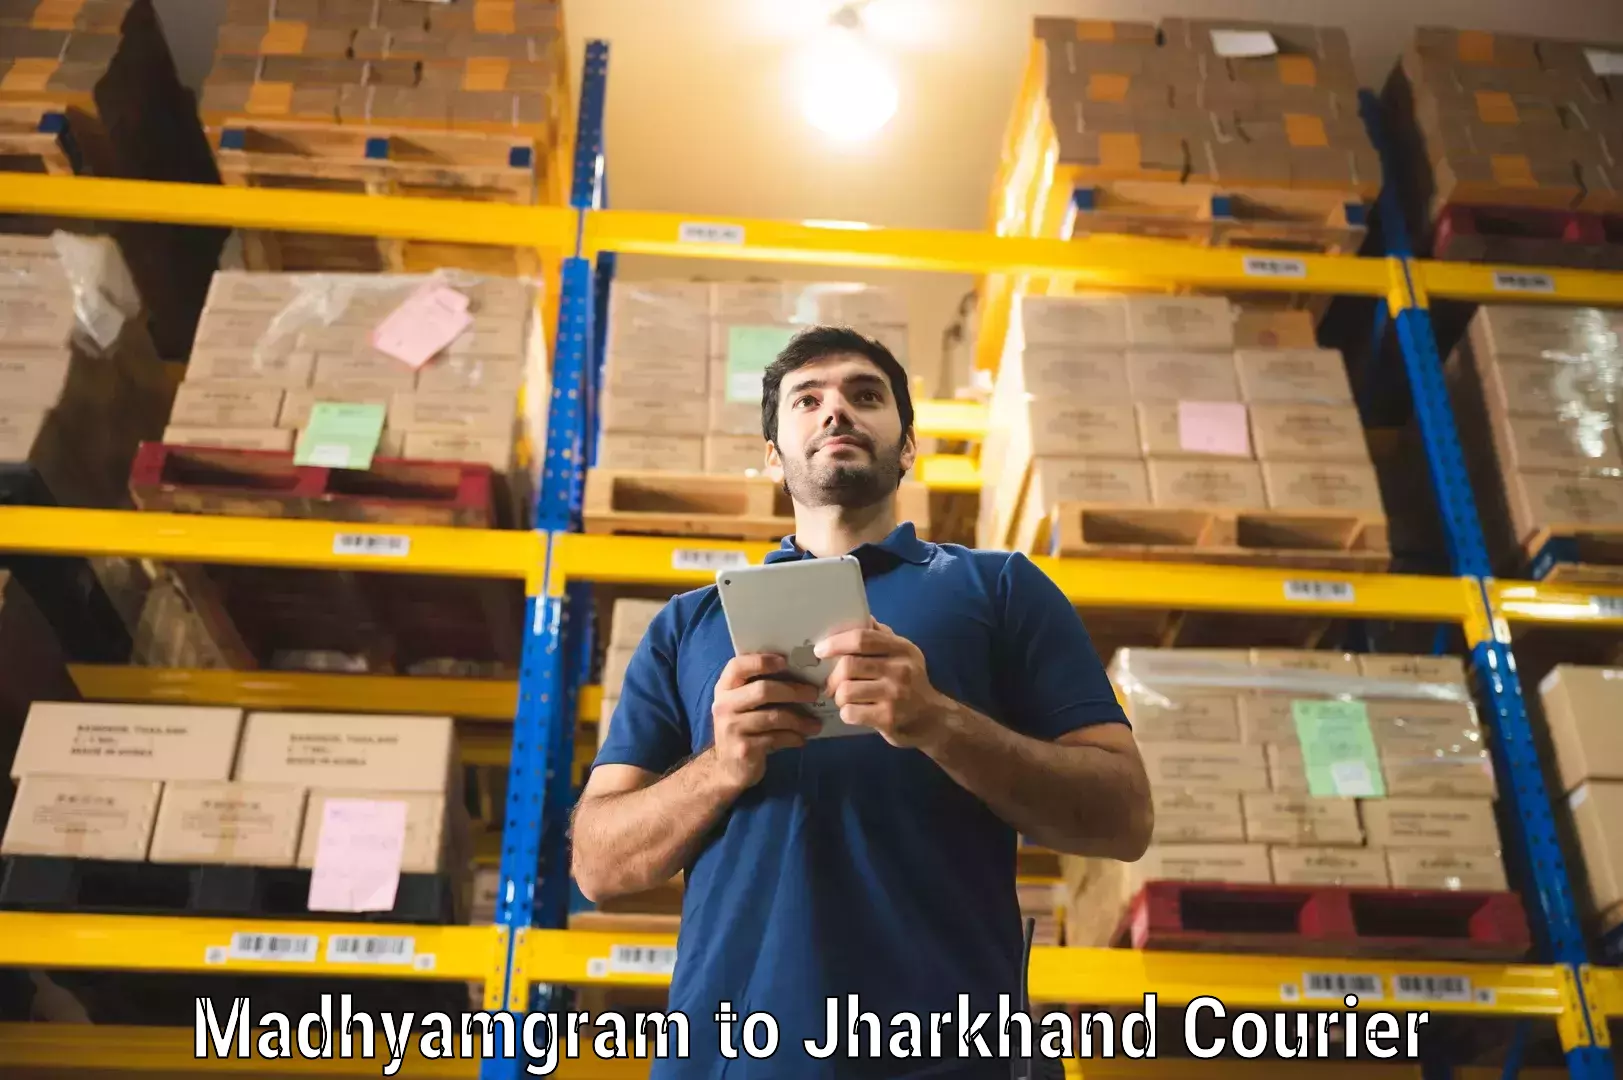 Bulk courier orders Madhyamgram to Ranchi